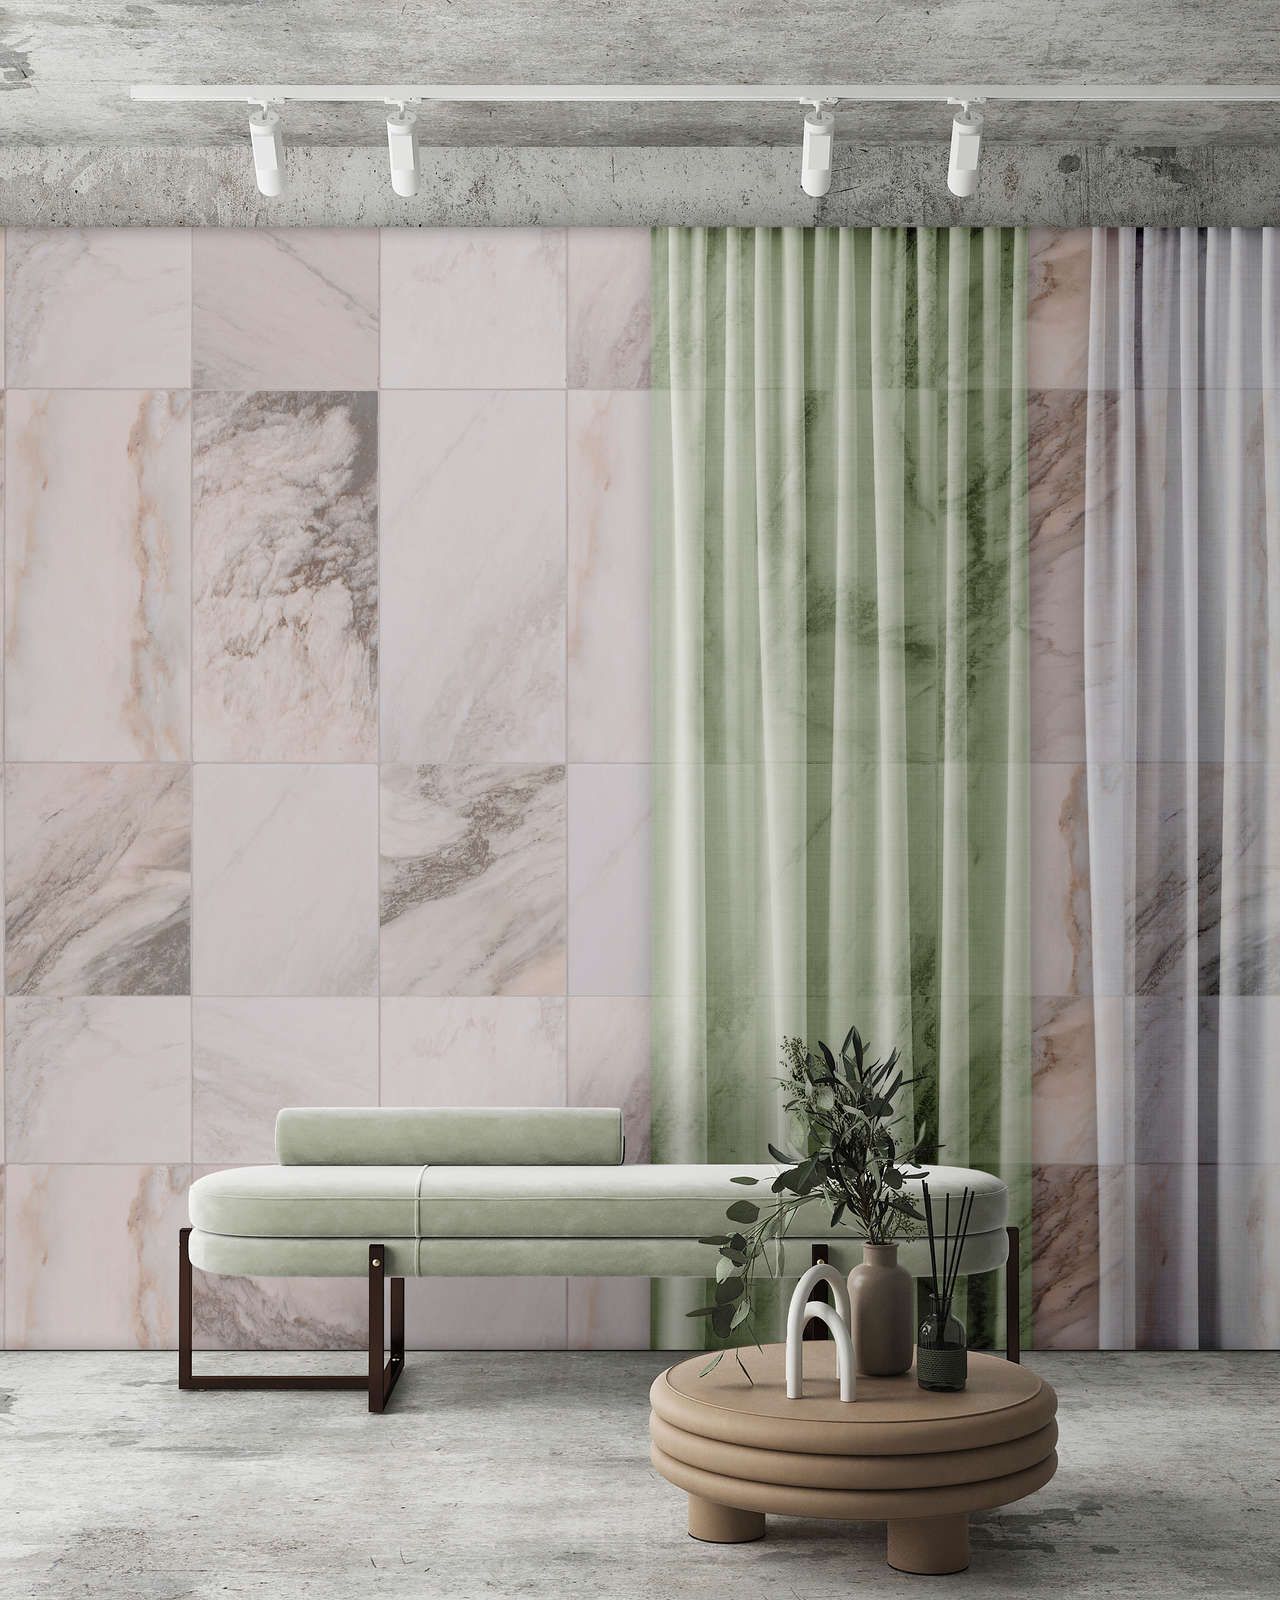             Photo wallpaper »nova 2« - Pastel coloured curtains in front of a beige marble wall - Matt, Smooth non-woven fabric
        